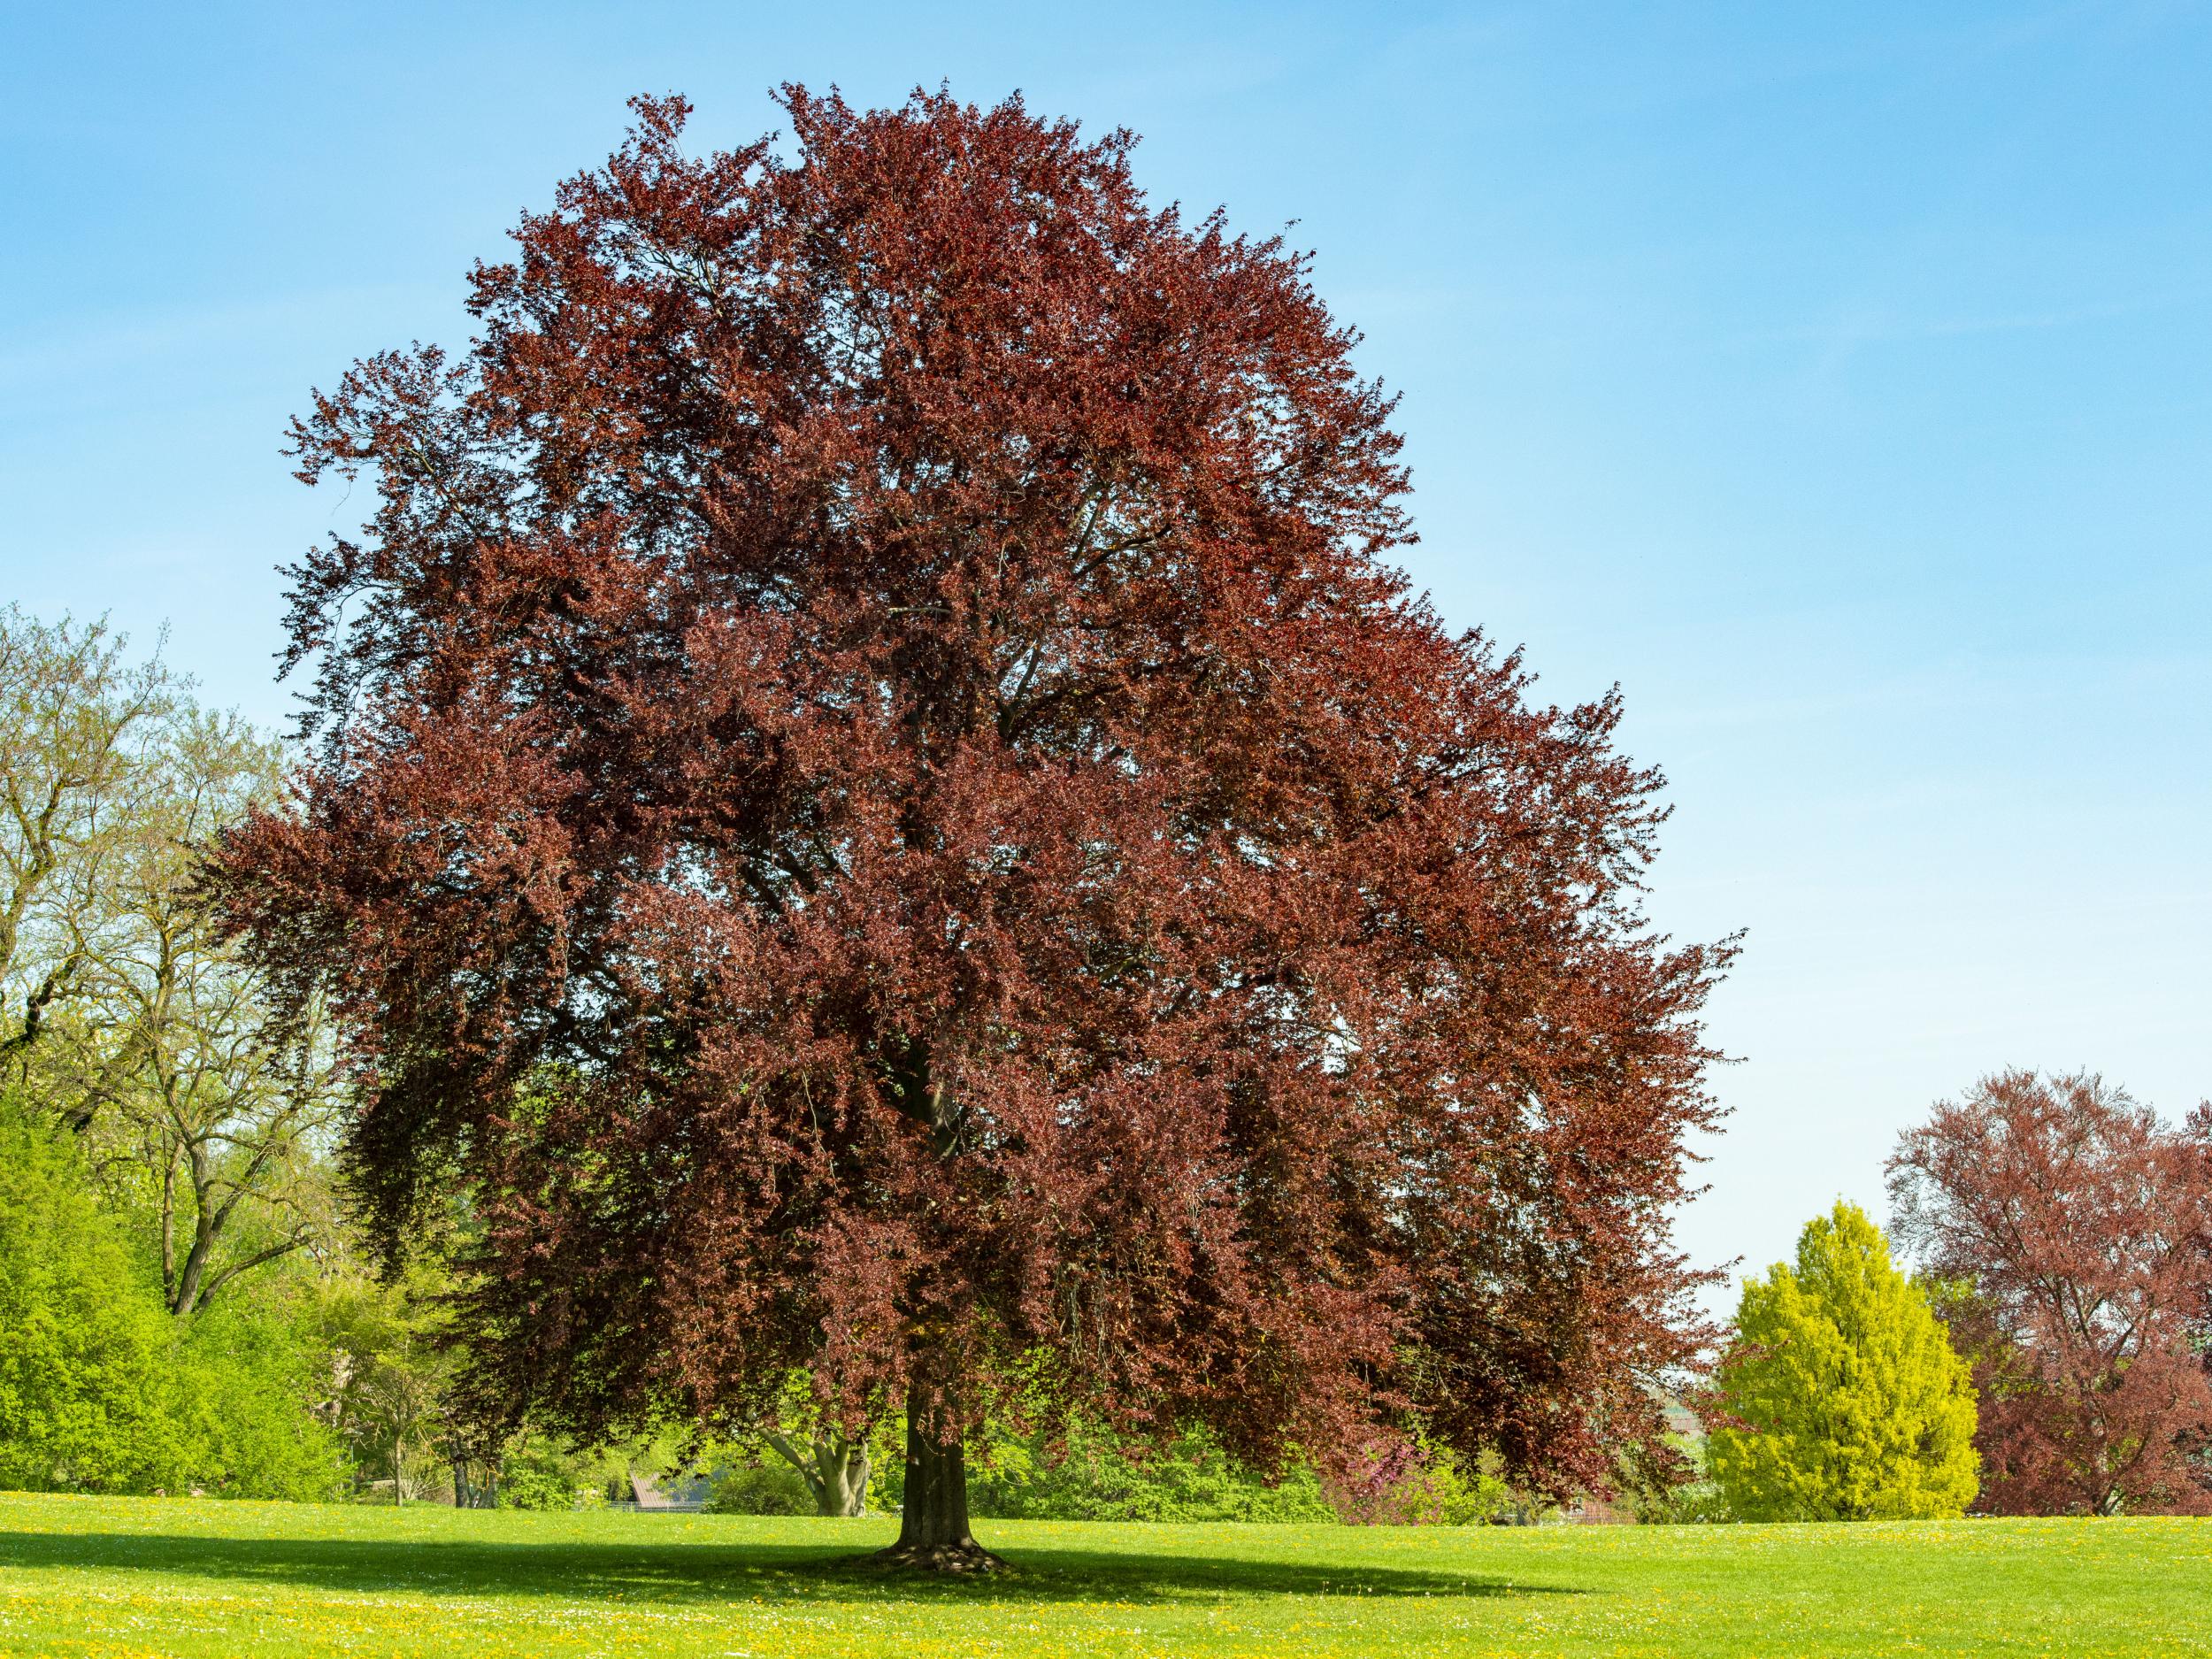 Will Gore noticed the beauty of the copper beech tree on his morning commute